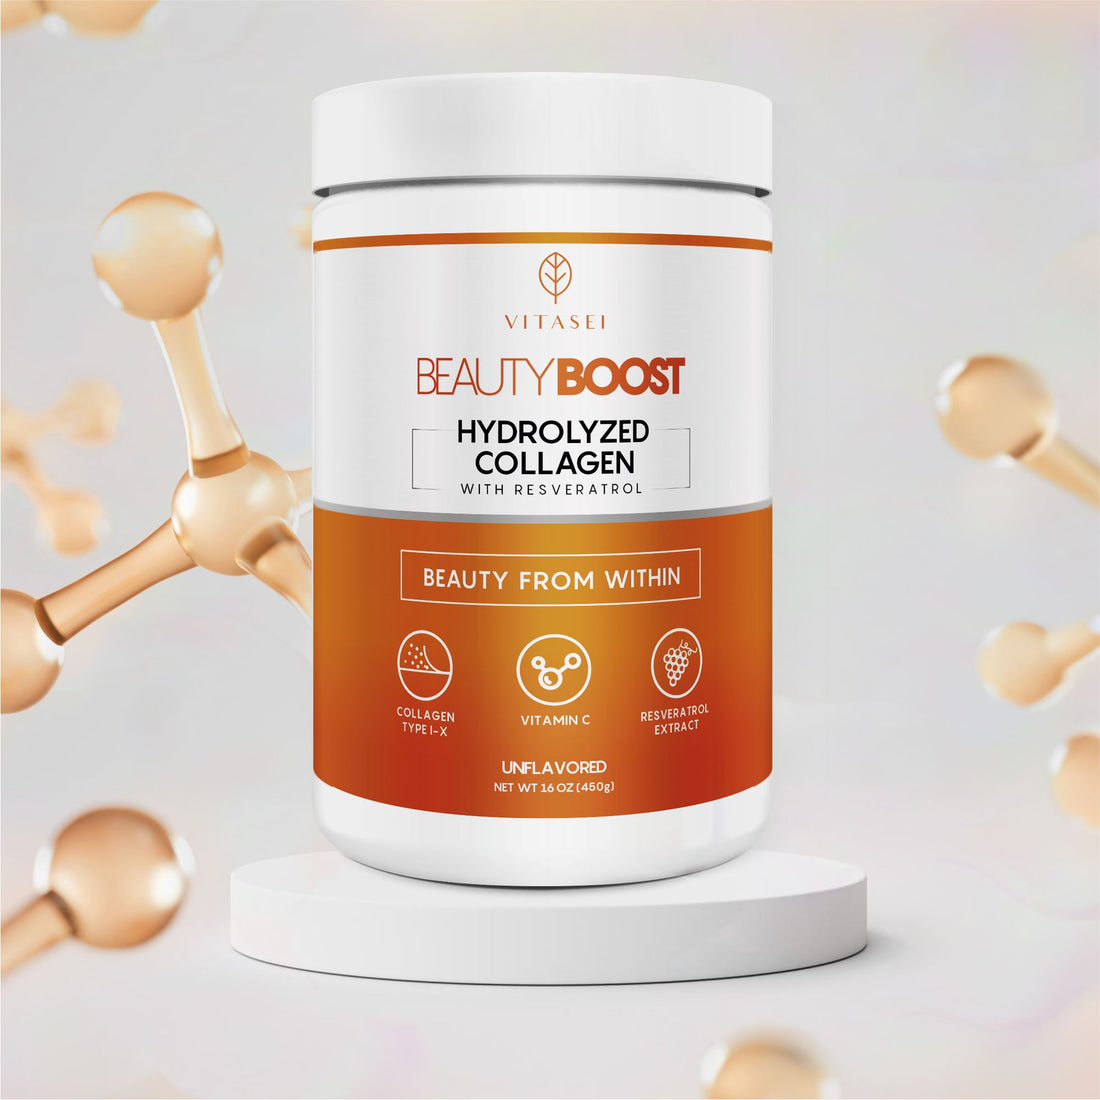 UNFLAVORED MAXIMUM ABSORPTION HYDROLYZED COLLAGEN